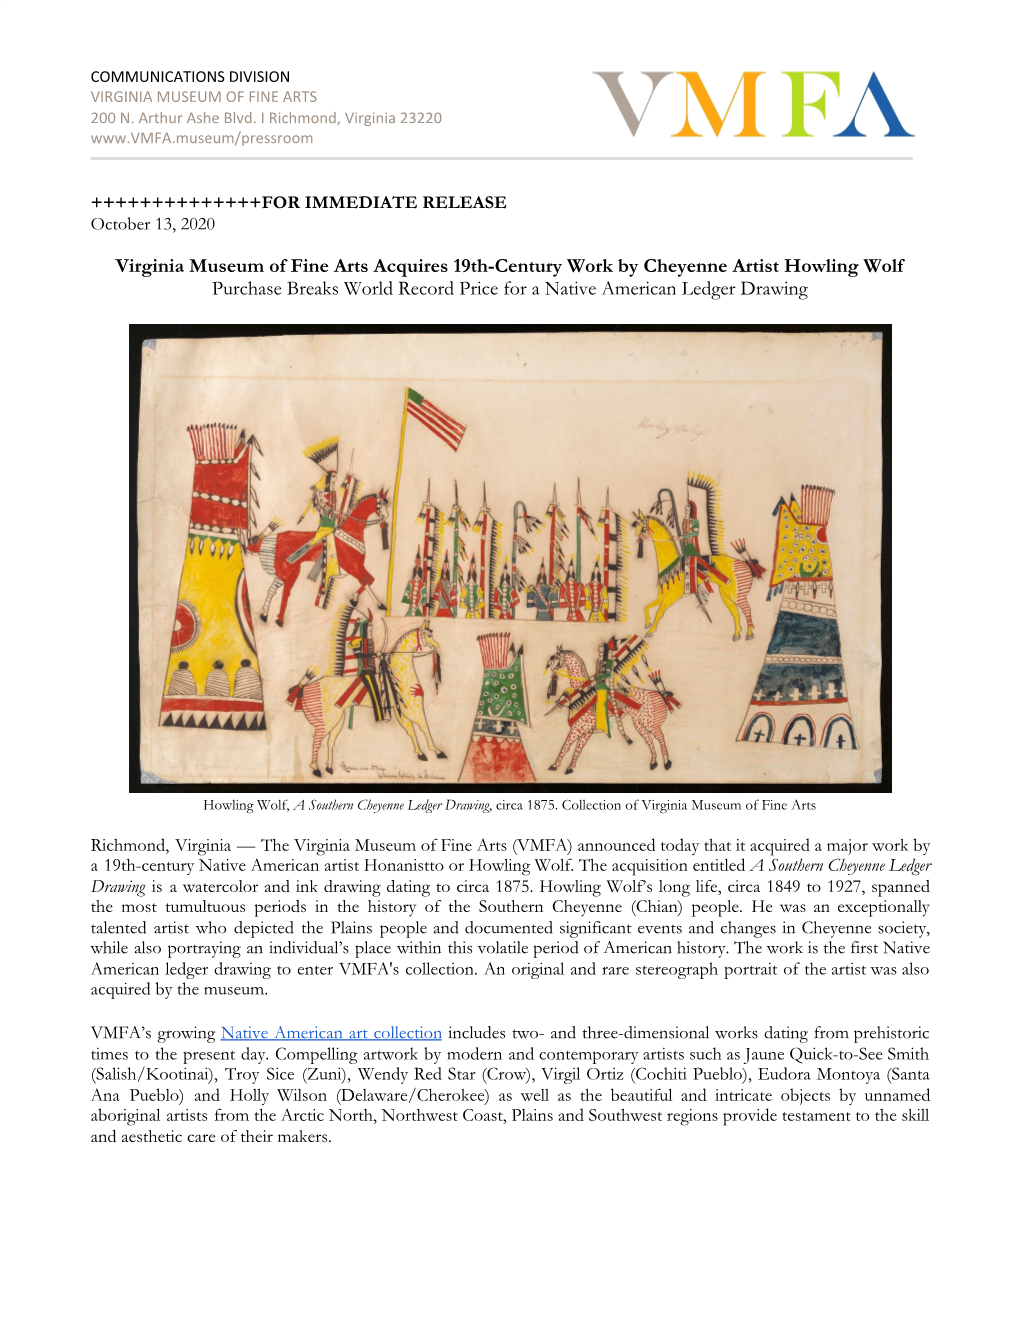 Virginia Museum of Fine Arts Acquires 19Th-Century Work by Cheyenne Artist Howling Wolf Purchase Breaks World Record Price for a Native American Ledger Drawing